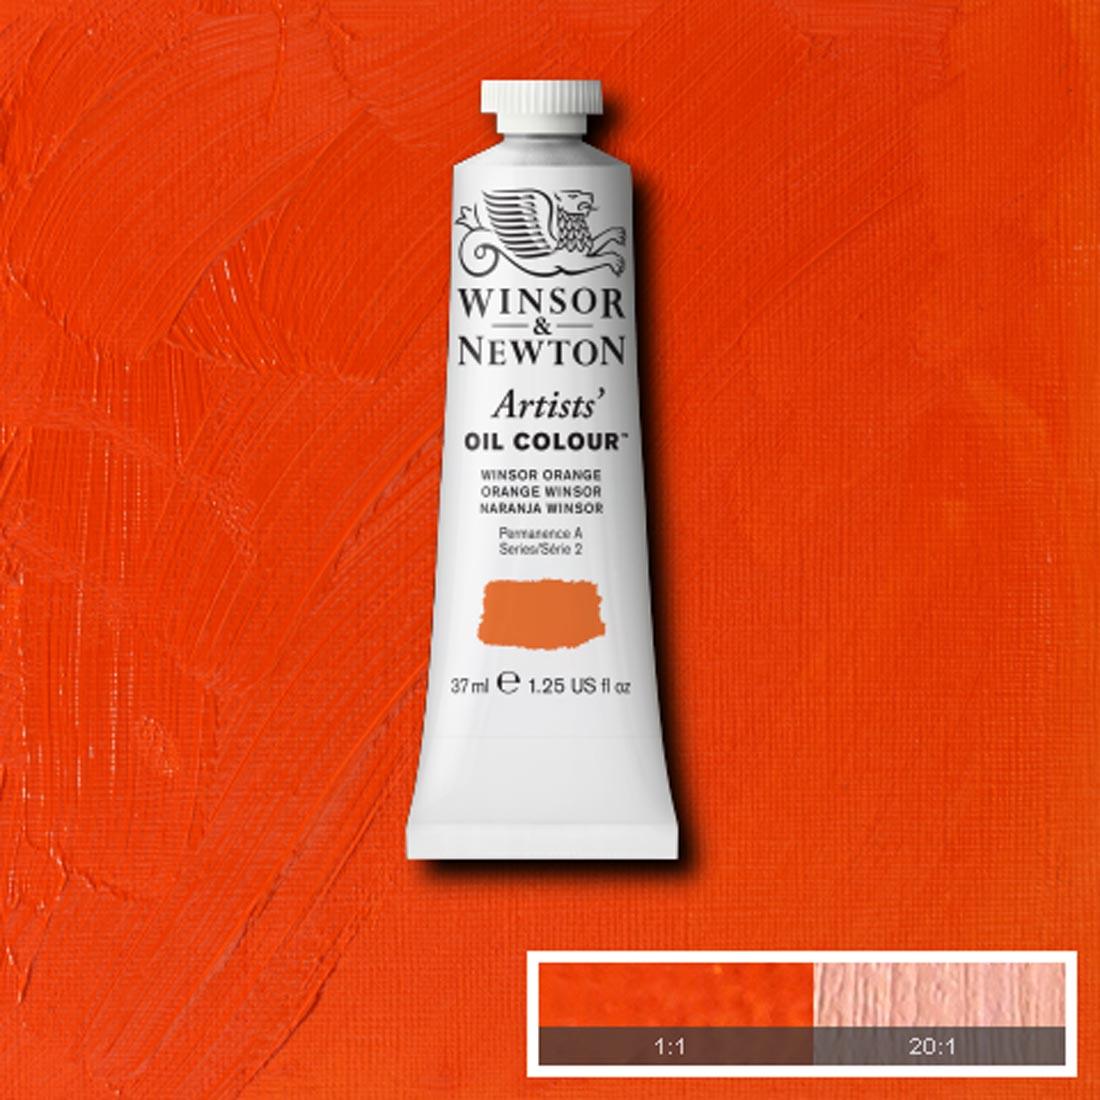 Tube of Winsor Orange Winsor & Newton Artists' Oil Colour with a paint swatch for the background